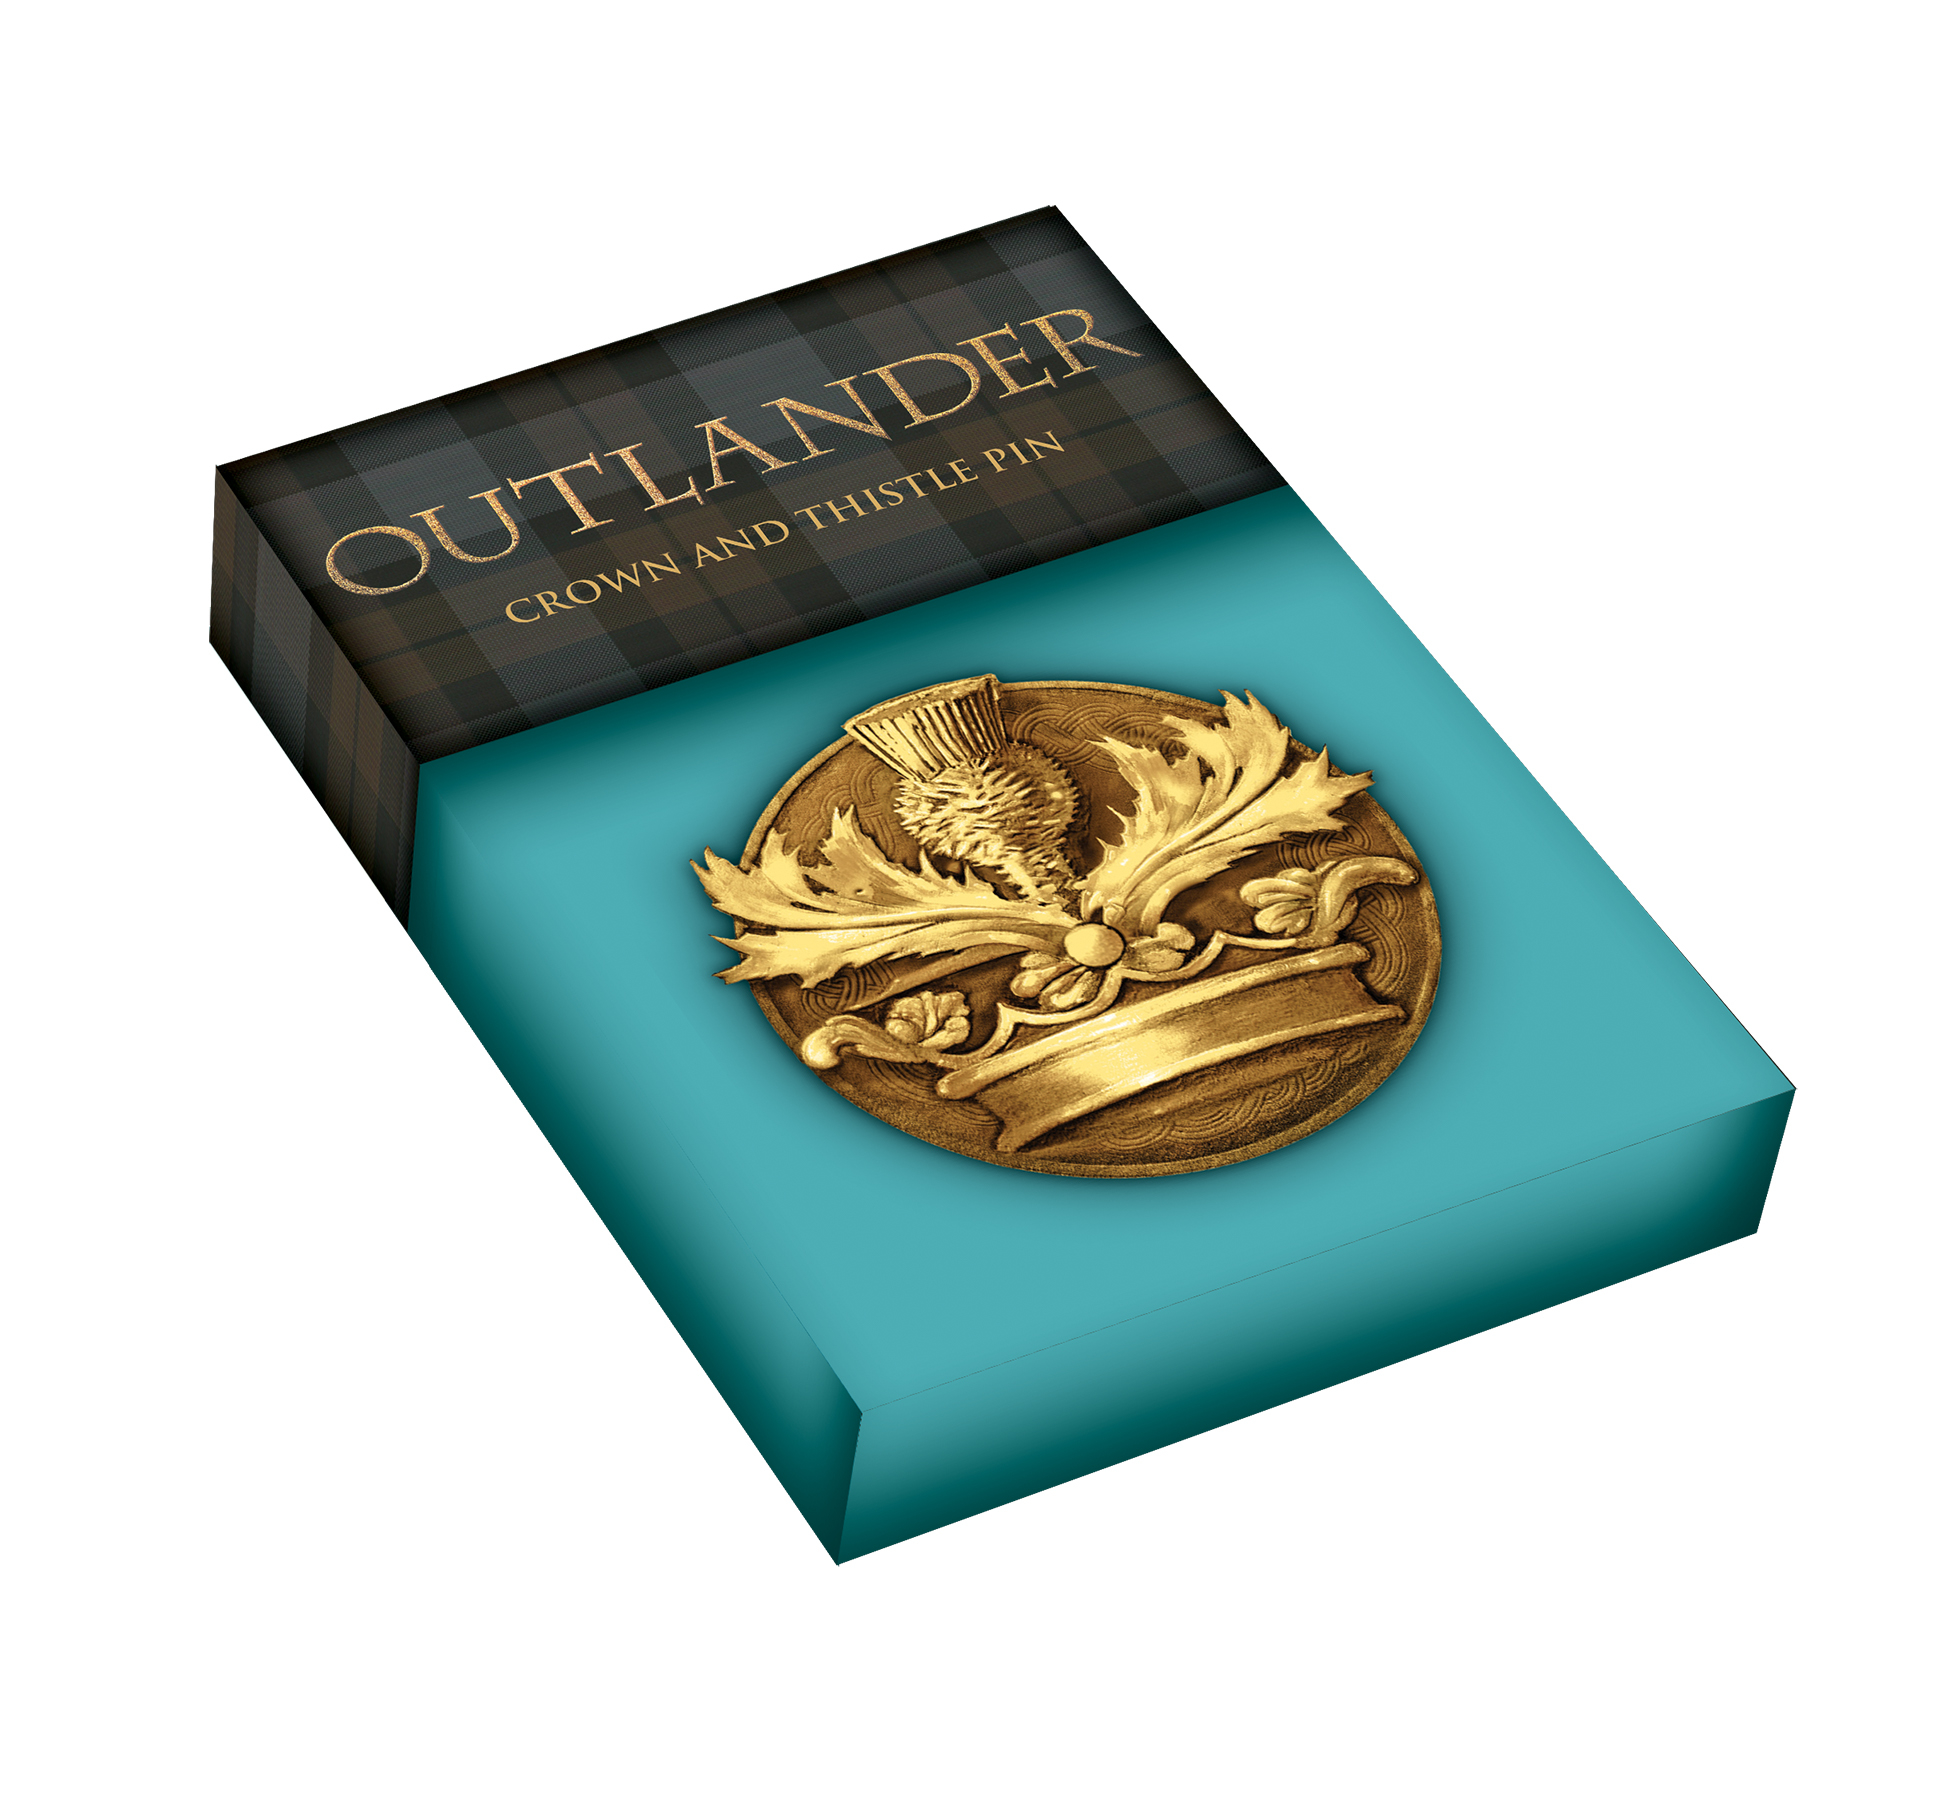 OUTLANDER PIN CROWN & THISTLE